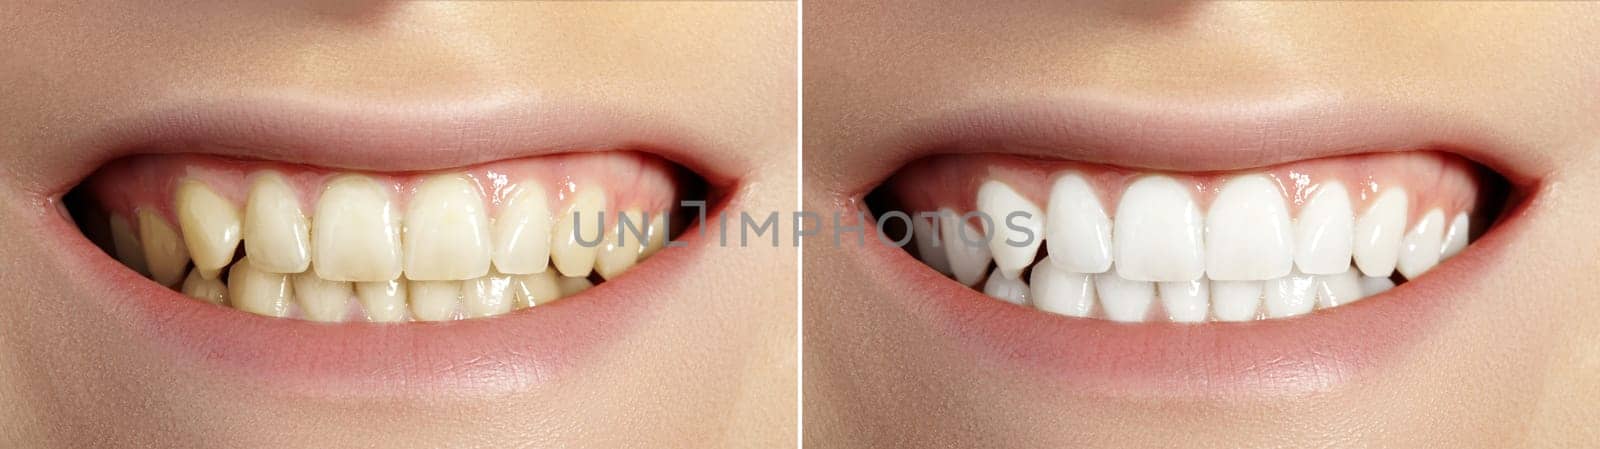 Woman Teeth Before and After Whitening. Perfect Smile with Healthy Teeth. Dental Clinic Patient. Oral Care Dentistry by MarinaFrost